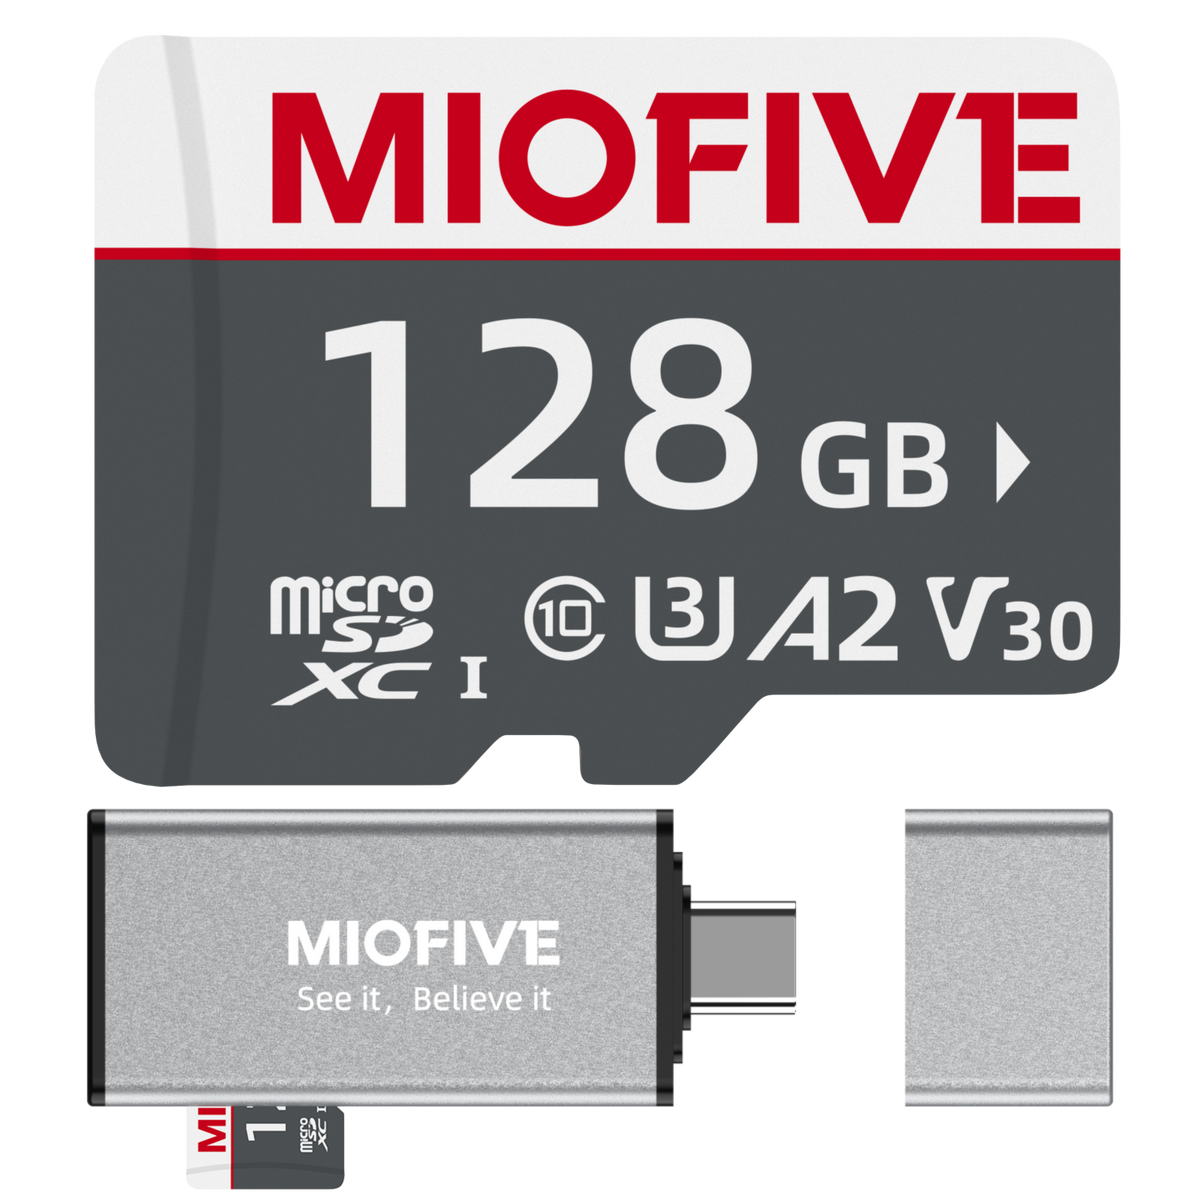 Miofive 128GB microSDXC Memory Card - Ultimate Micro SD Card with USB 3.0 Type-C Card Reader 170MB/s, C10, U3, A2, V30, 4K for Dash Cams, Android Smartphones, Tablets, and Gaming devices